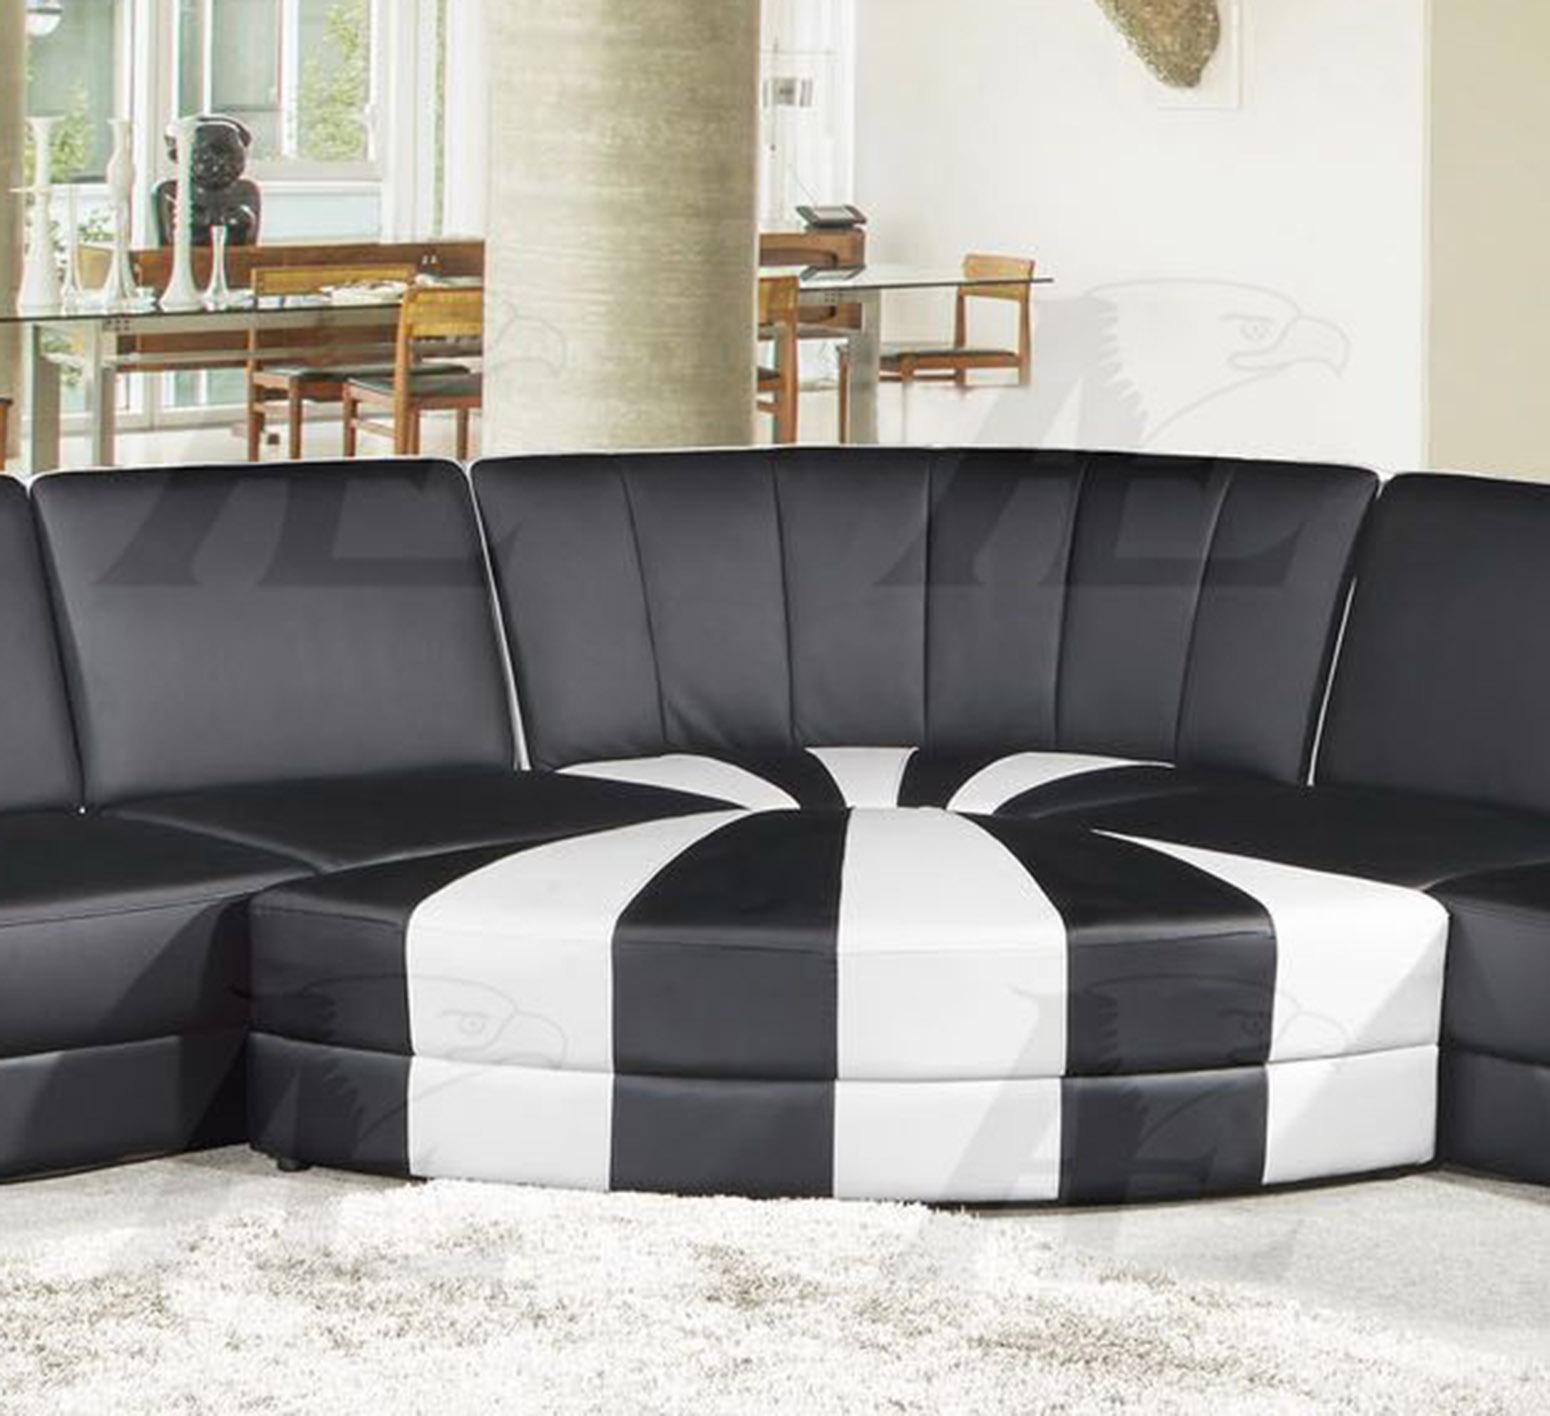 

    
American Eagle Furniture AE-L901M-BK.W Black and White Sectional 2 Sofas Corner and Ottoman Set Bonded Leather 4pcs
